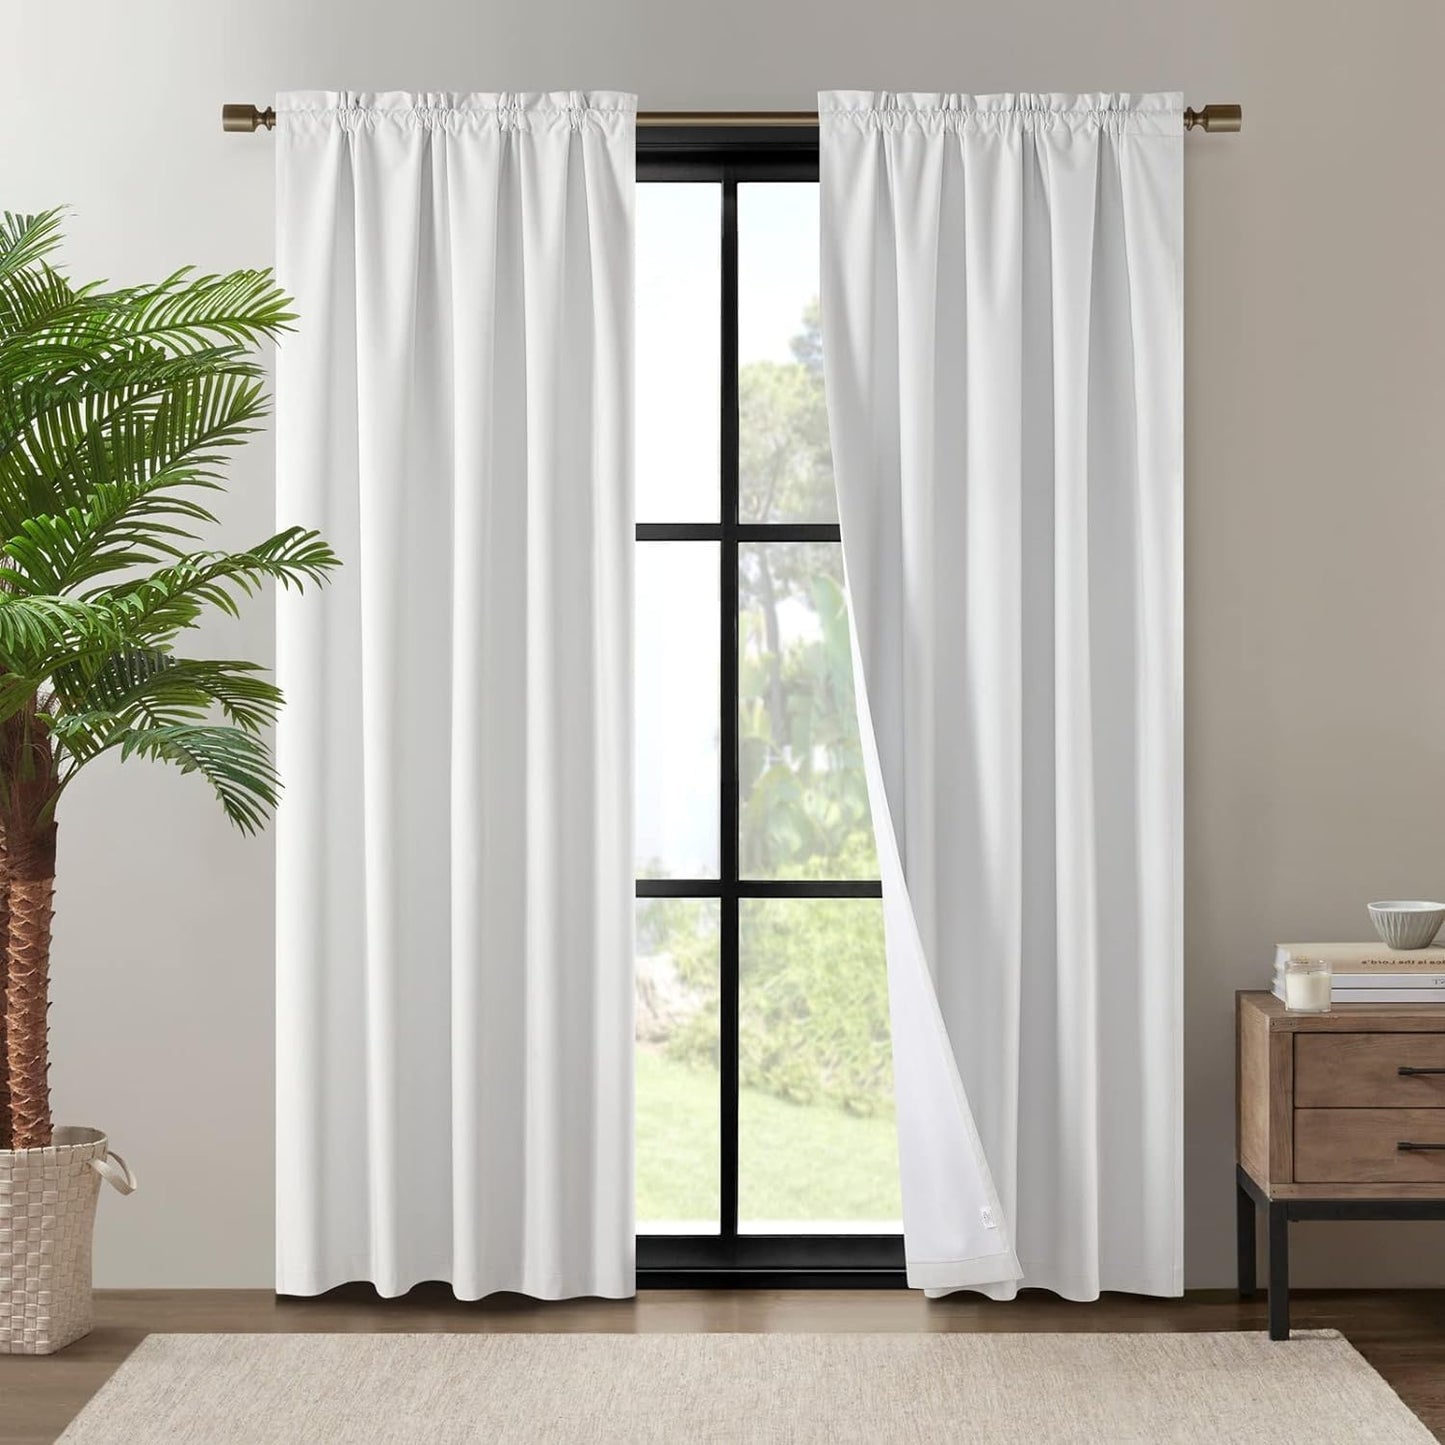 Dreaming Casa Linen Blackout Curtains for Beadroom 2 Panels 96 Inch Long Living Room Drapes Boho Rustic 100% Black Out Natural Window Curtain with Rod Pocket, 52" W X 96" L  Dreaming Casa White, Rod Pocket 2 X (72"W X 84"L) 